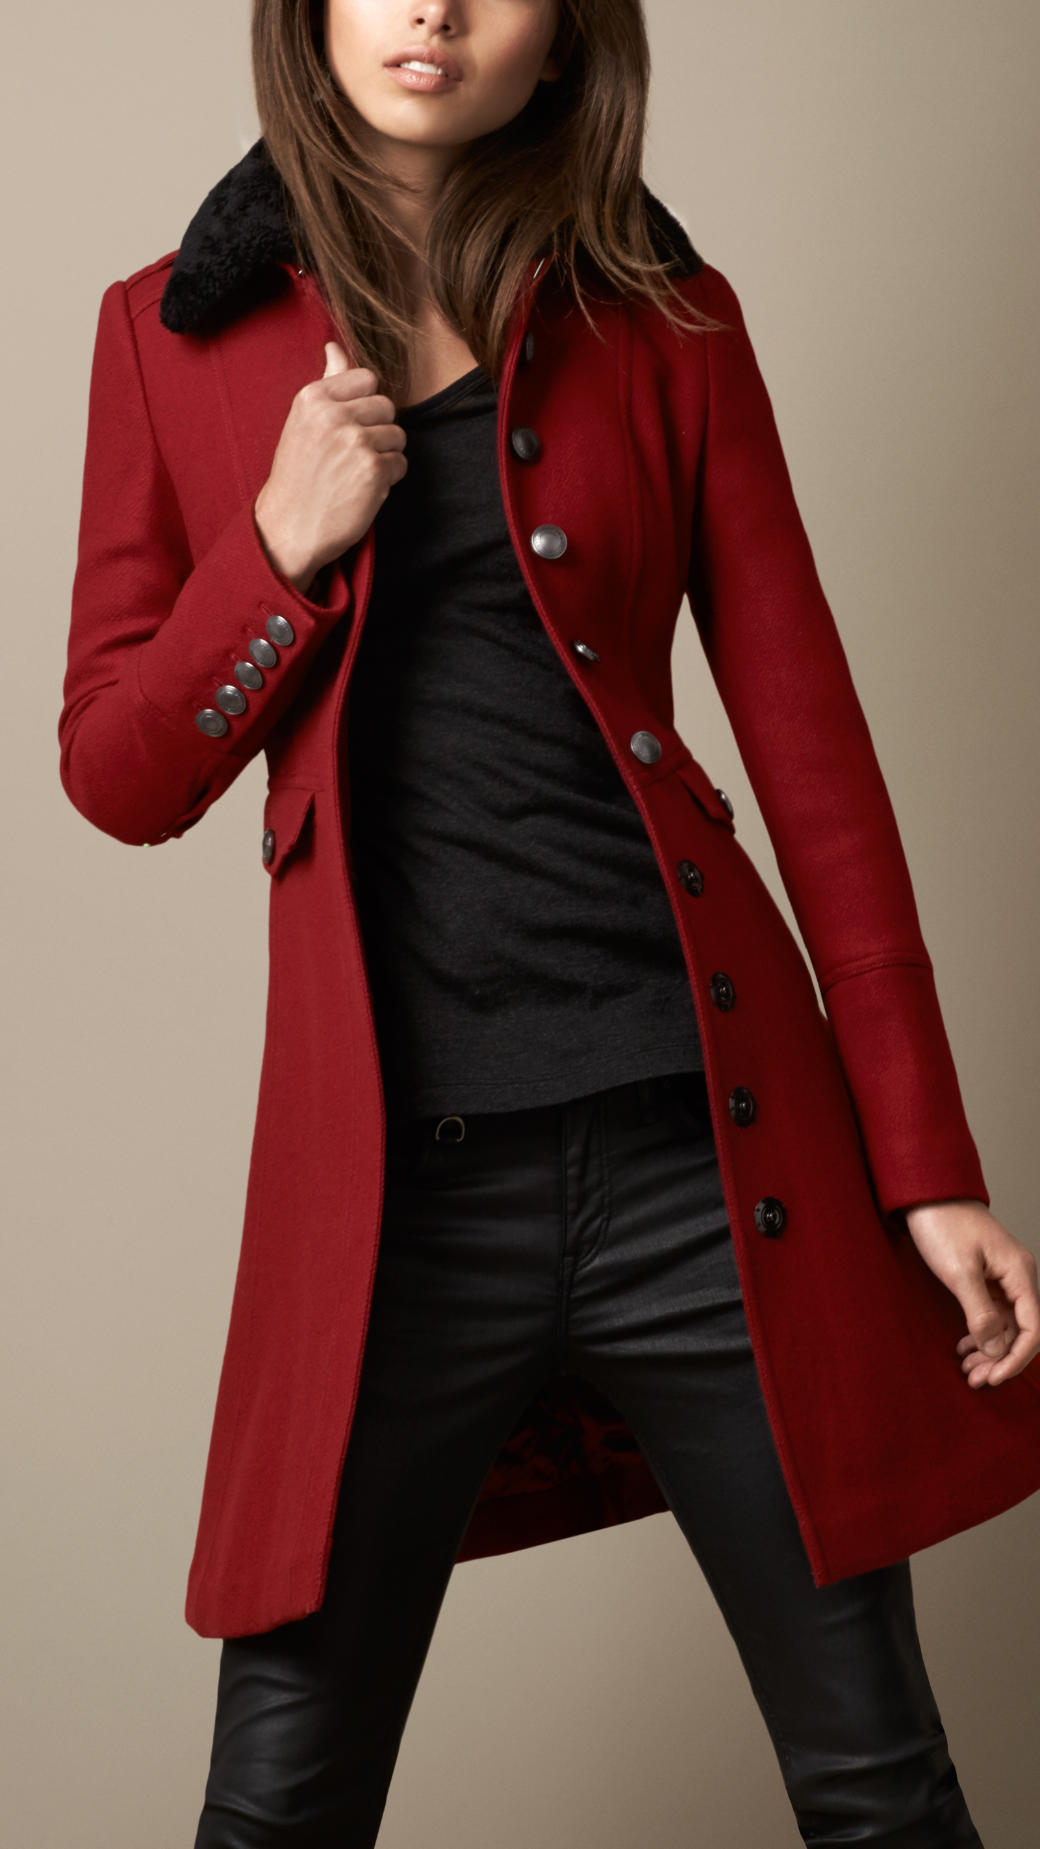 Burberry Damson Red Shearling Collar Military Coat Product 1 13855105 439710021 